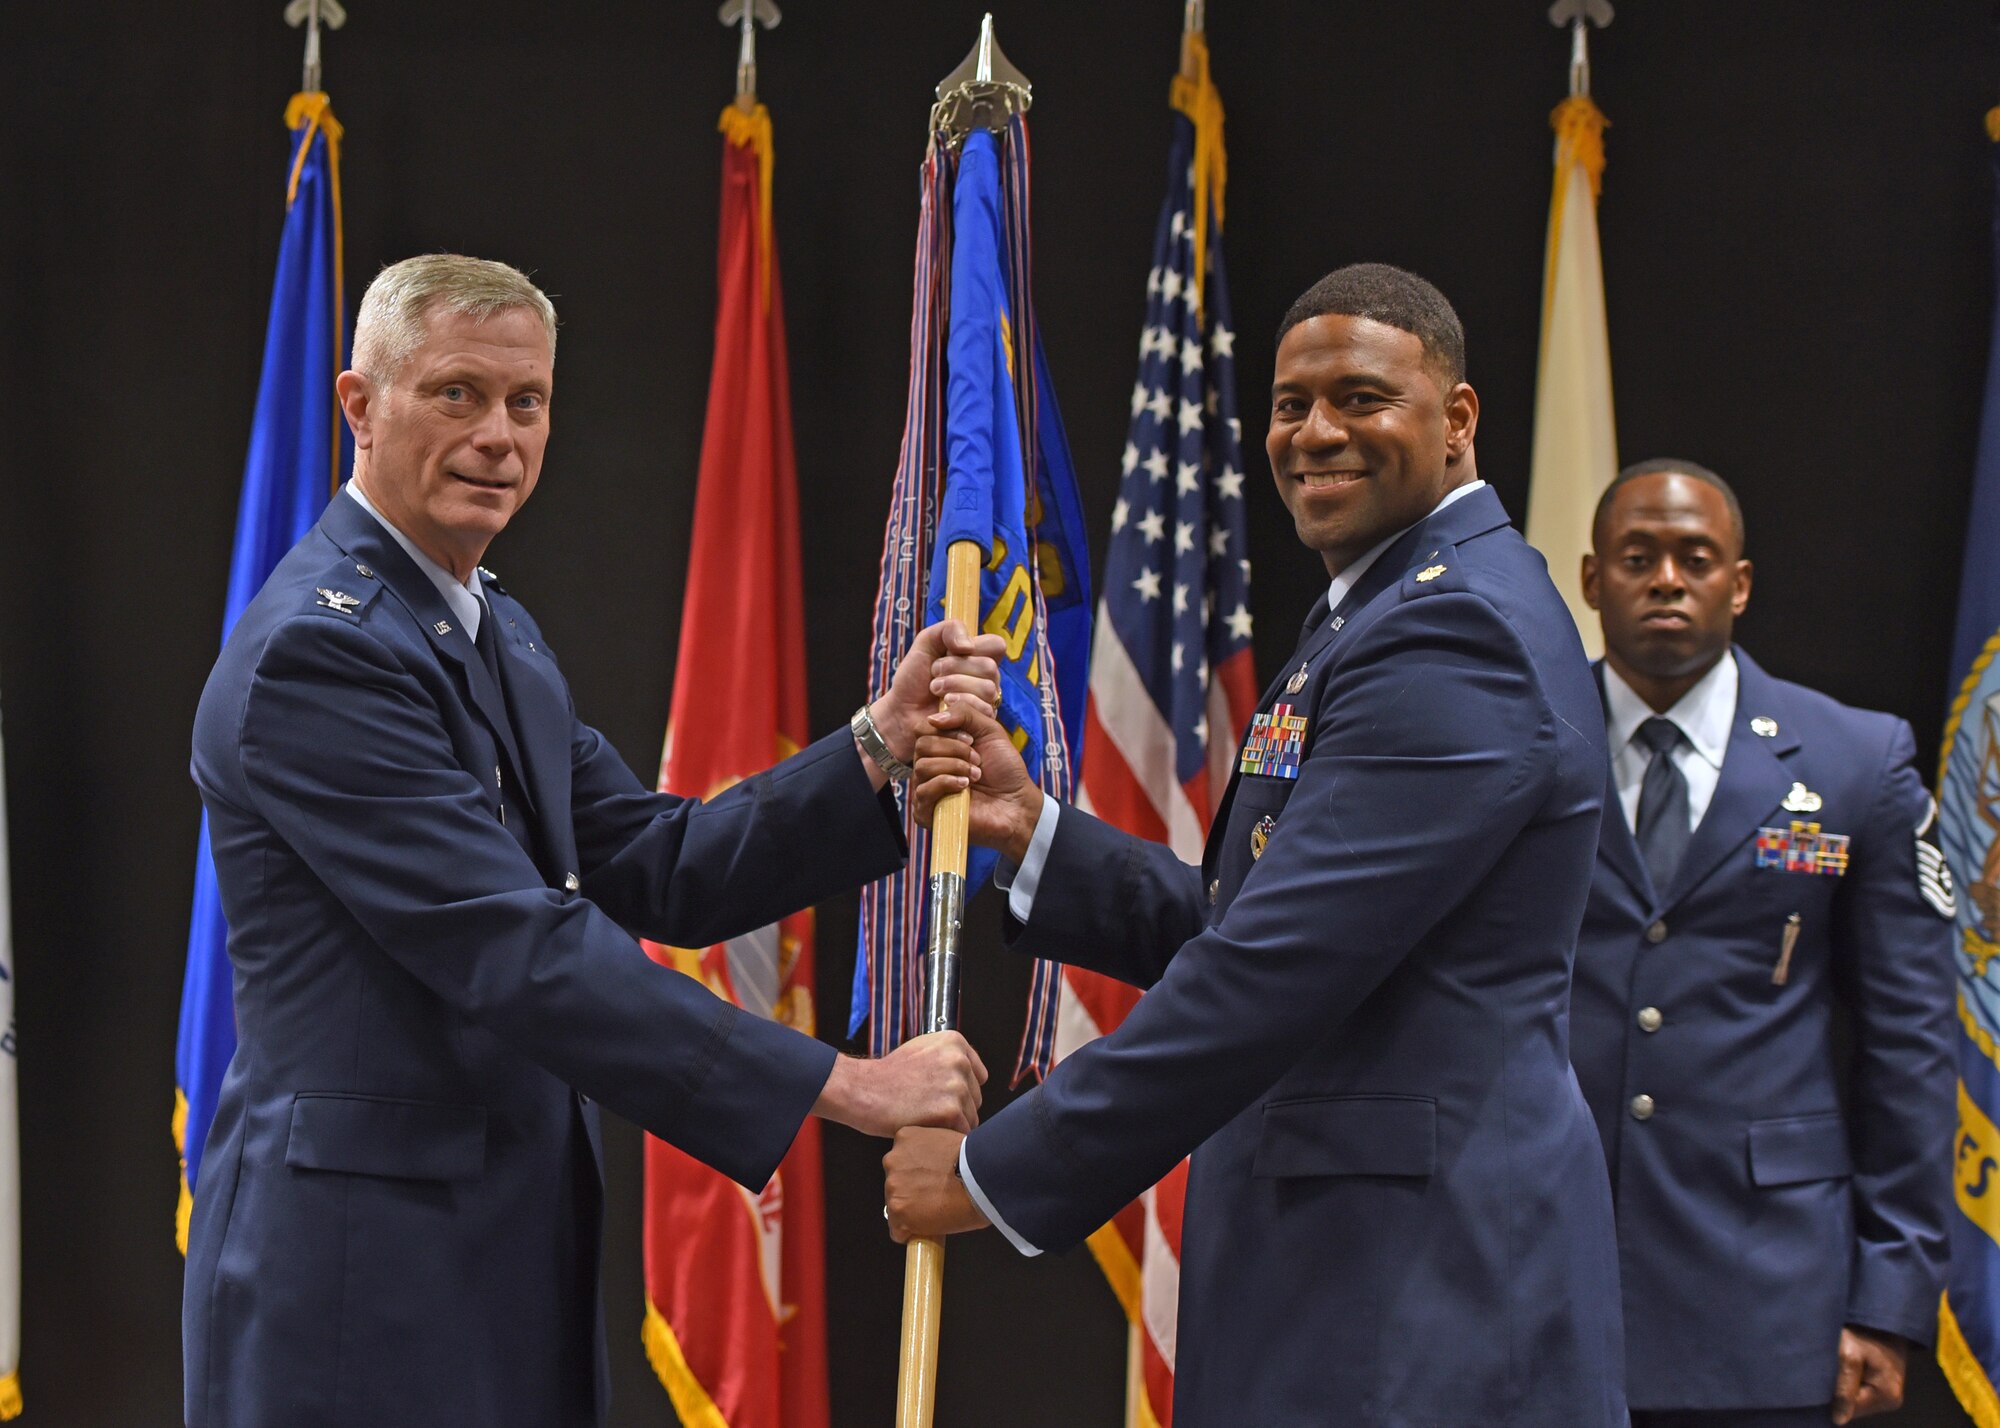 U.S. Air Force Col. Tony England, 17th Mission Support Group commander, passes the guidon to Maj. Ivan Pinder-Bey, 17th Contracting Squadron incoming commander, during the 17th CONS change of command ceremony at the Event Center, June 21, 2021. Pinder-Bey was previously student at Air Command and Staff College on Maxwell Air Force Base, Alabama. (U.S. Air Force photo by Senior Airman Abbey Rieves)